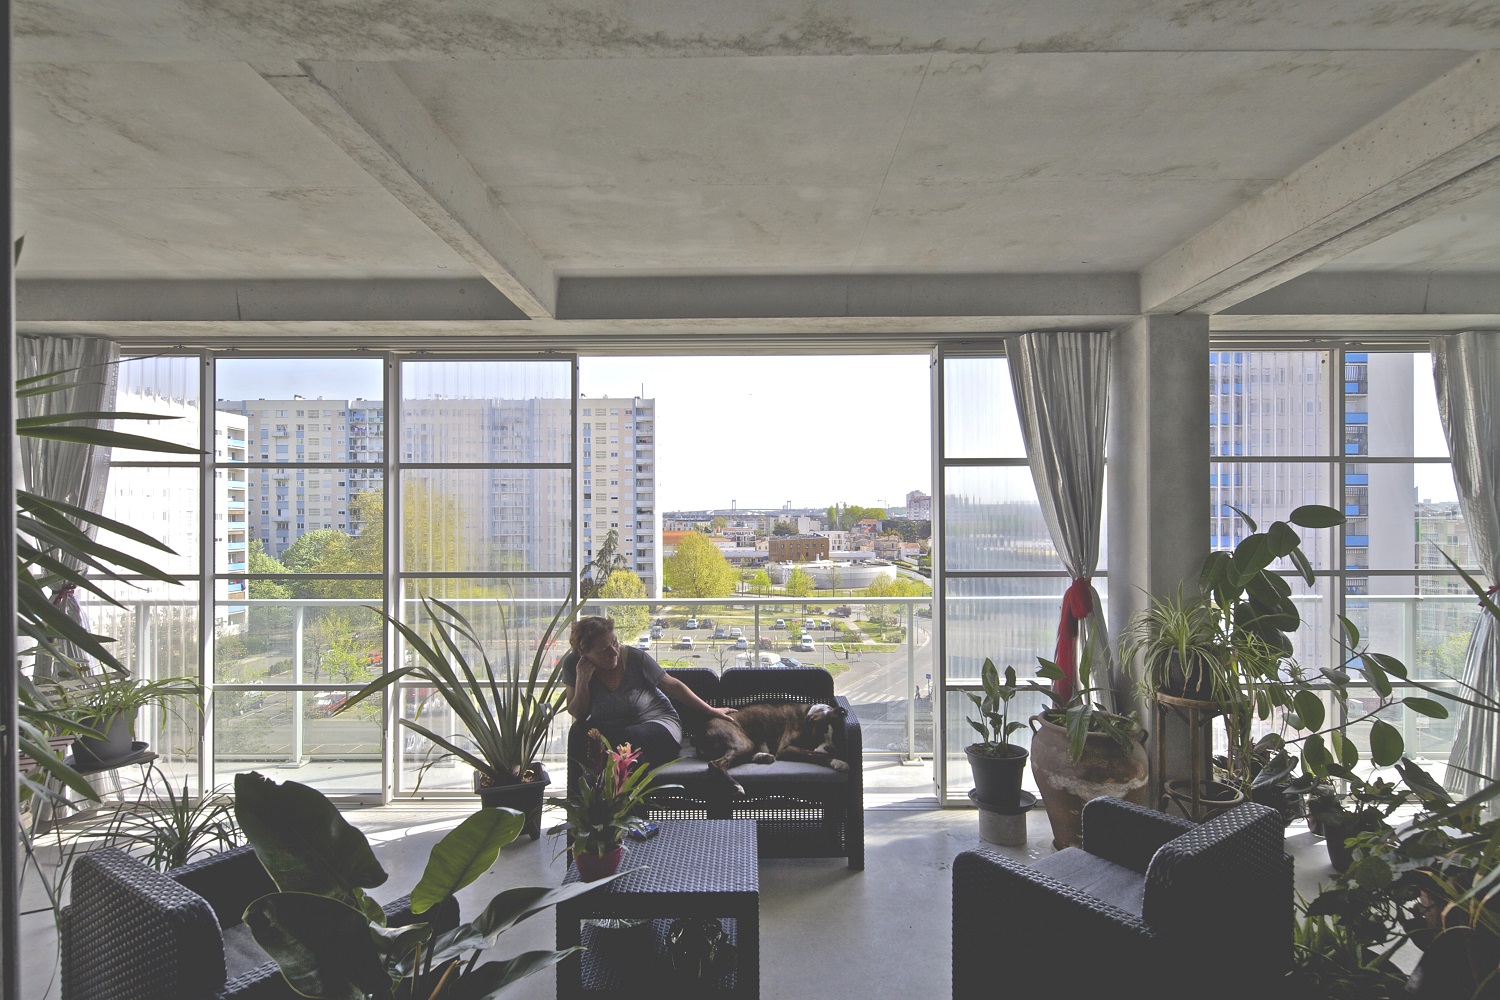 Photograph of an apartment in GRP Cite de Grand Parc showing a resident loungin on a couch with their dog in front of floor to ceiling windows